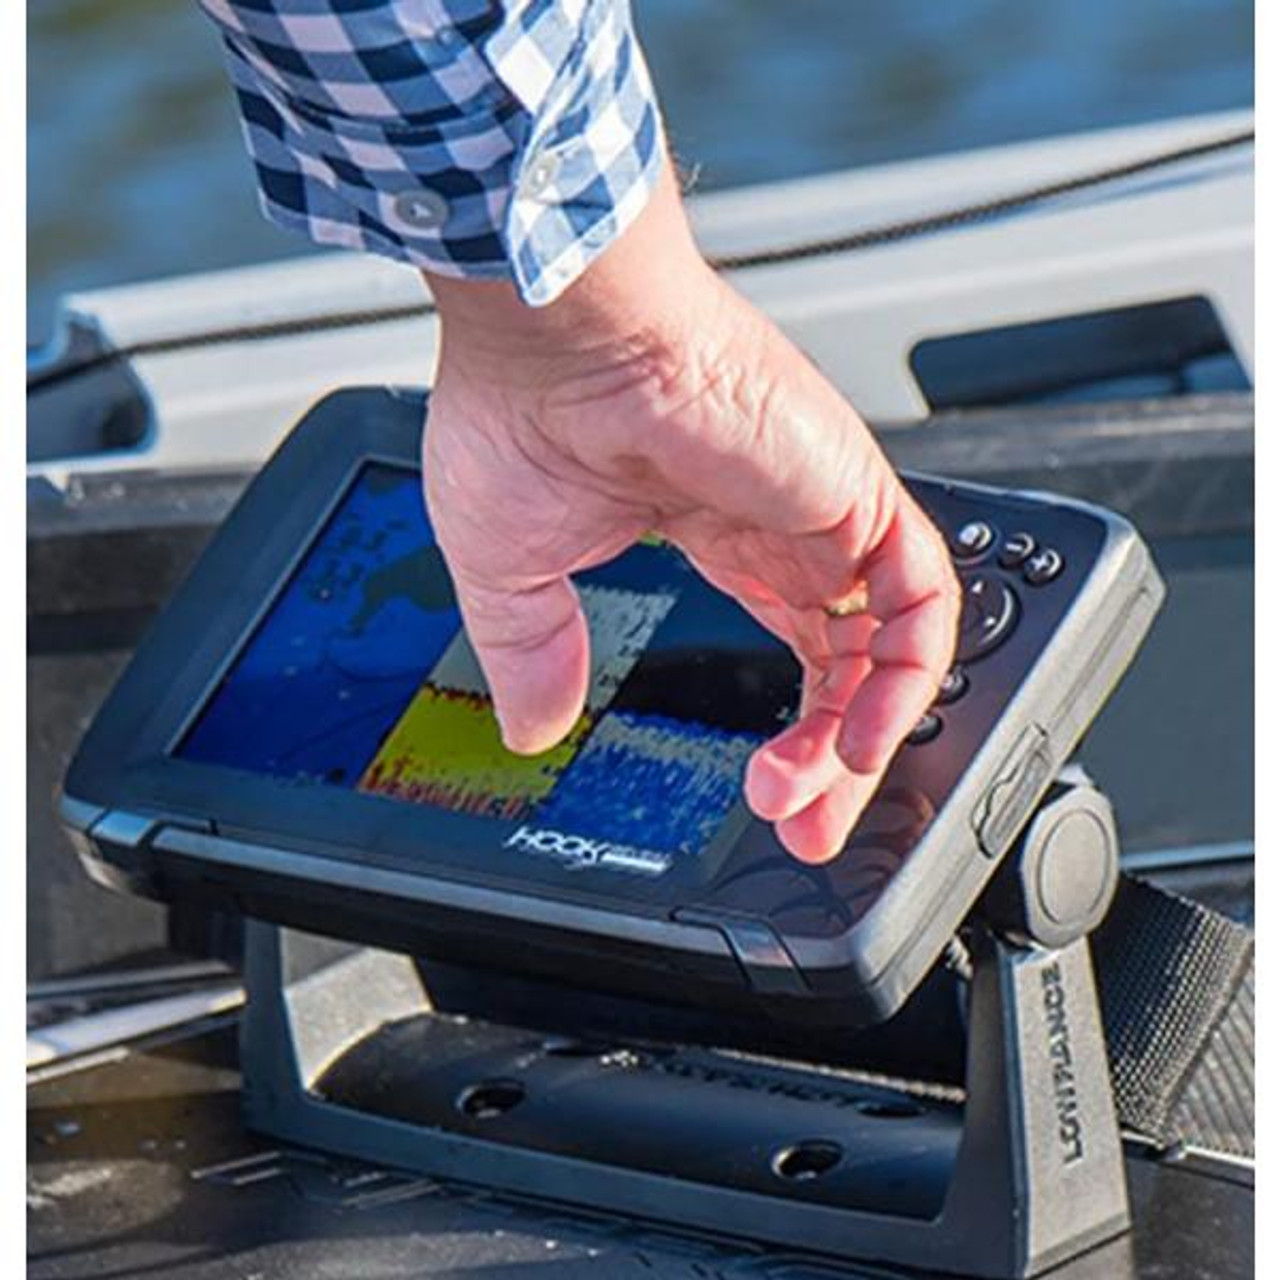 https://cdn11.bigcommerce.com/s-ydm181c/images/stencil/1280x1280/products/21537/42079/lowrance-hook-reveal-7x-tripleshot-with-chirp-sidescan-downscan-gps-plotter-000155150-8208_std__25458.1660458621.jpg?c=2